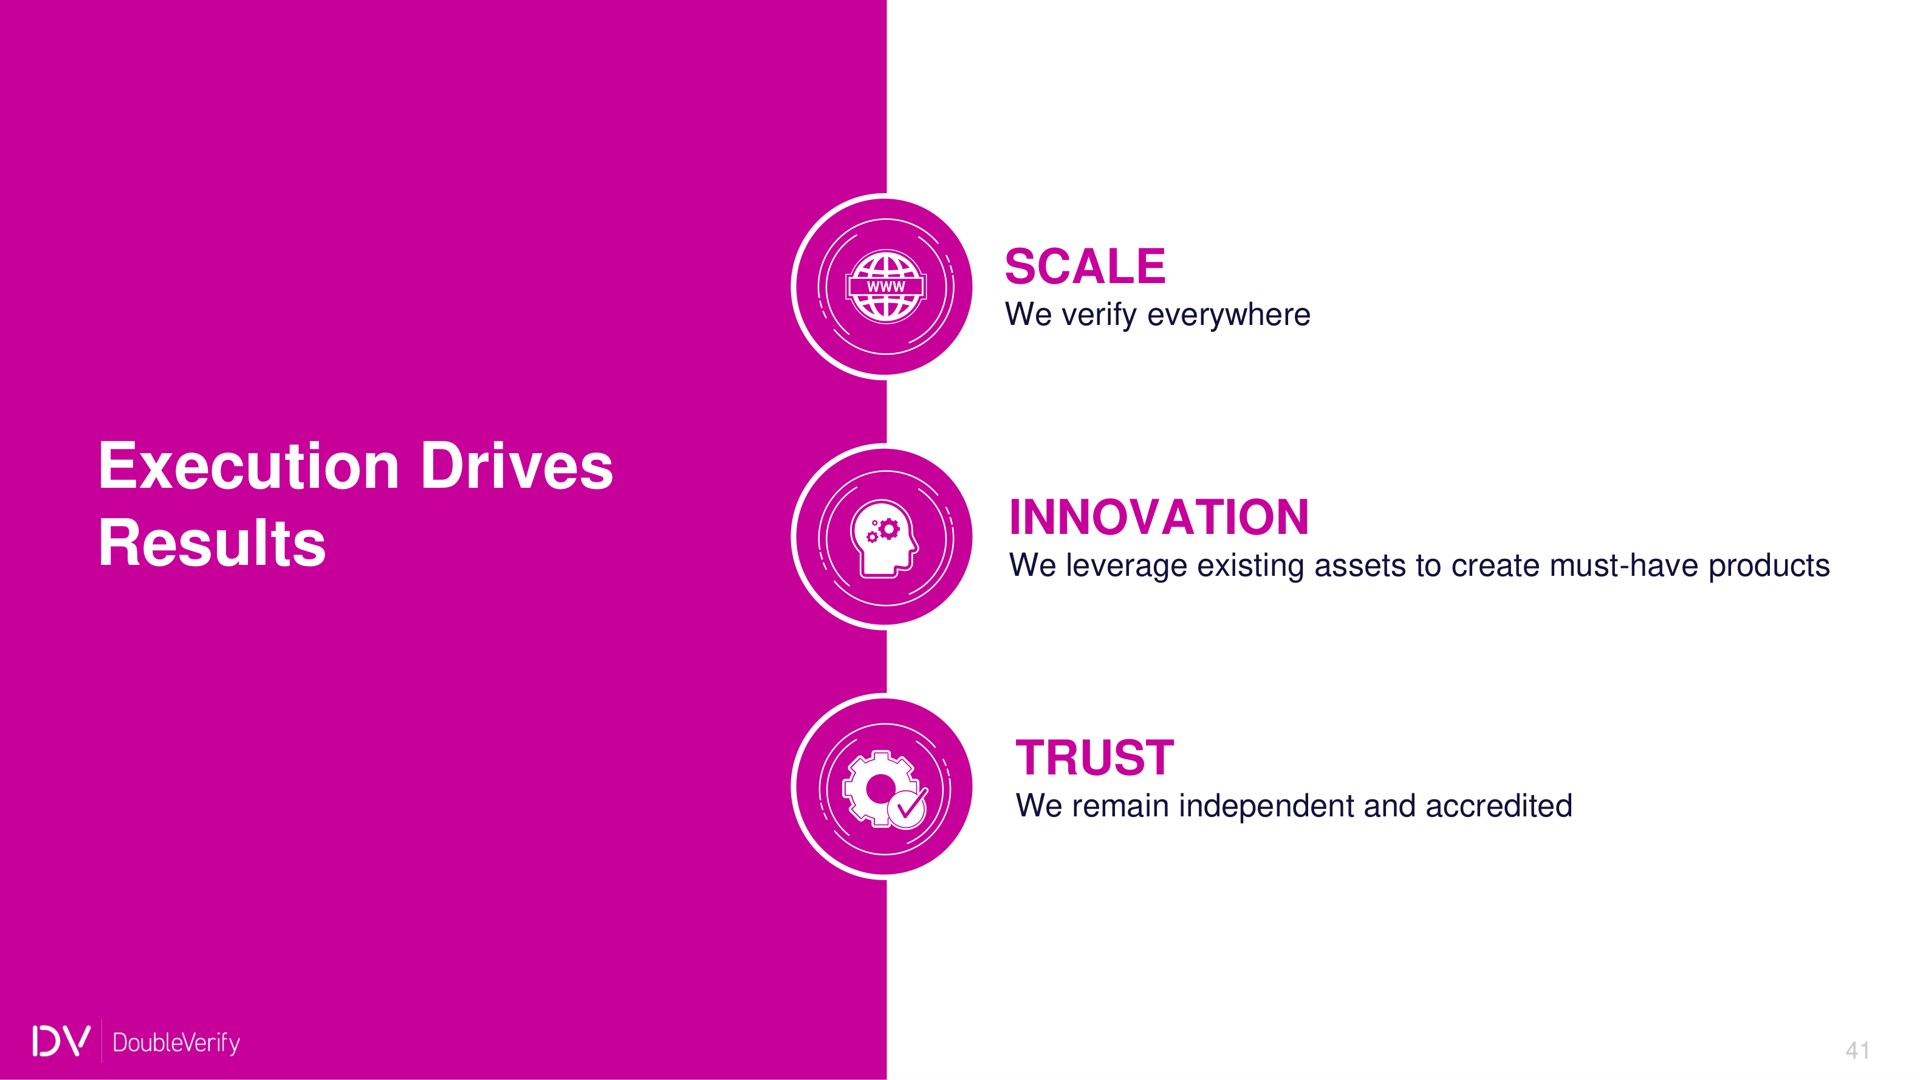 scale execution drives results innovation trust | DoubleVerify